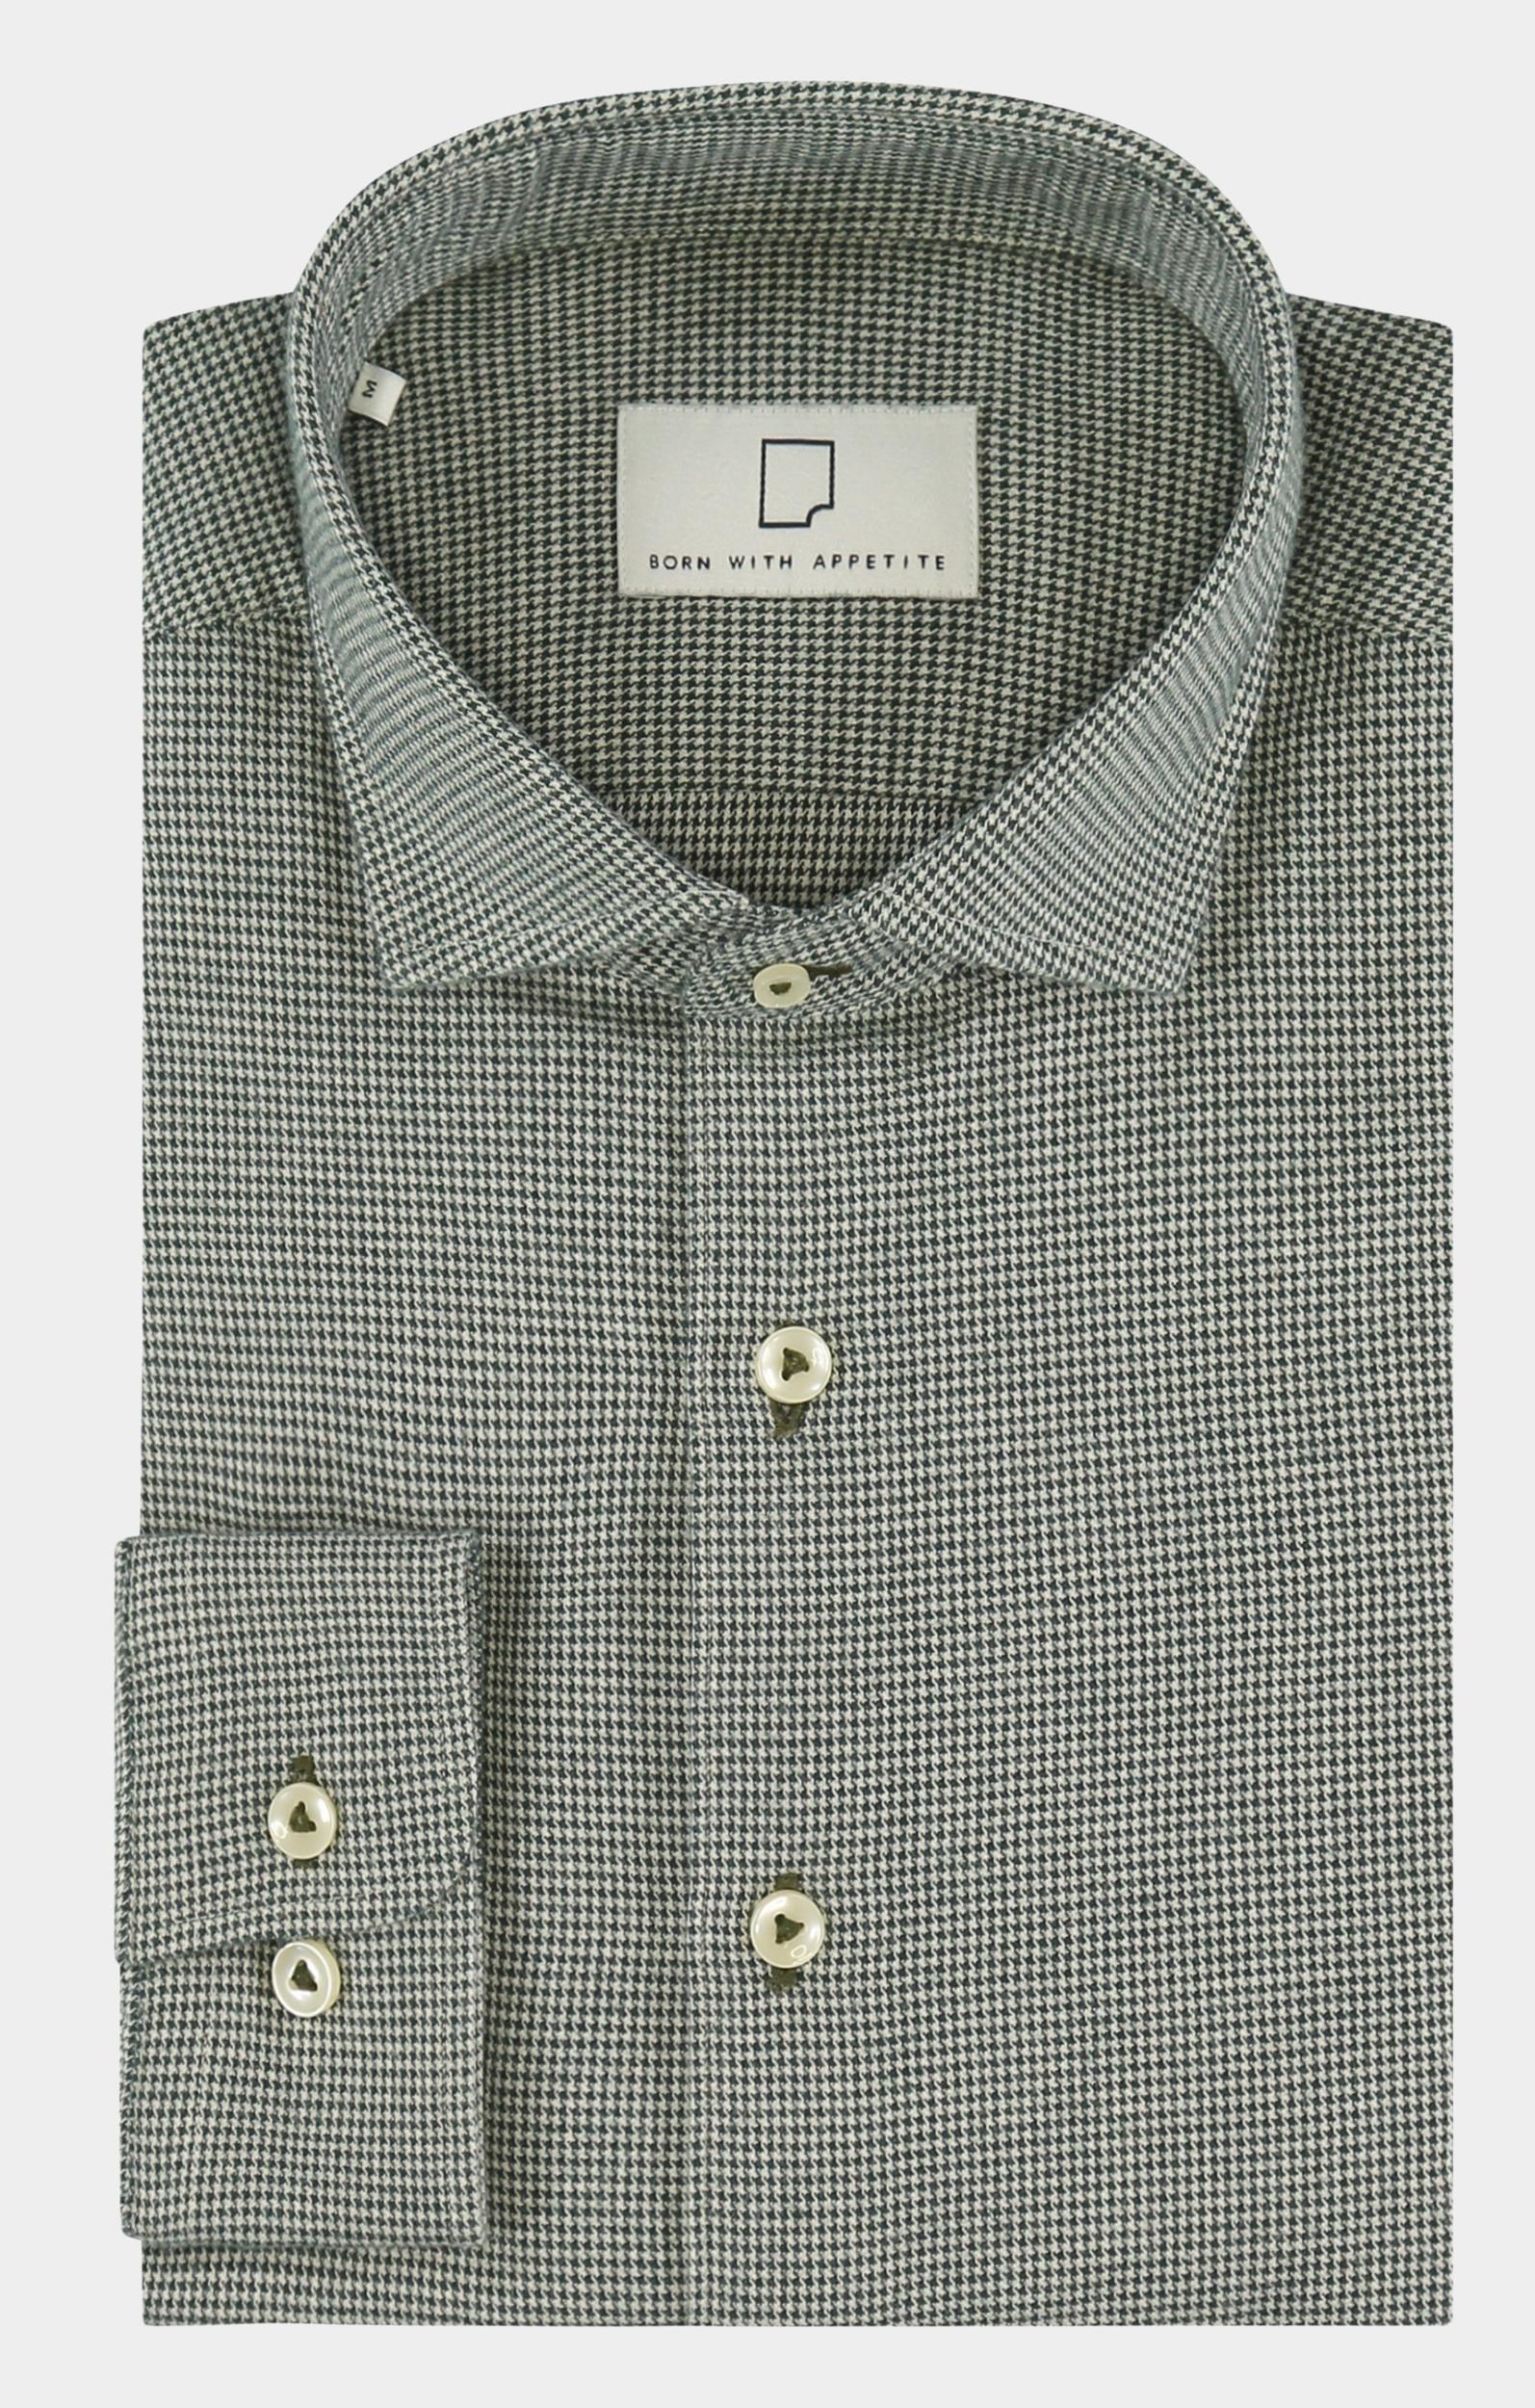 Born With Appetite Casual hemd lange mouw Groen Flake Shirt Flanel Stretch Yd 23307FL32/357 forest